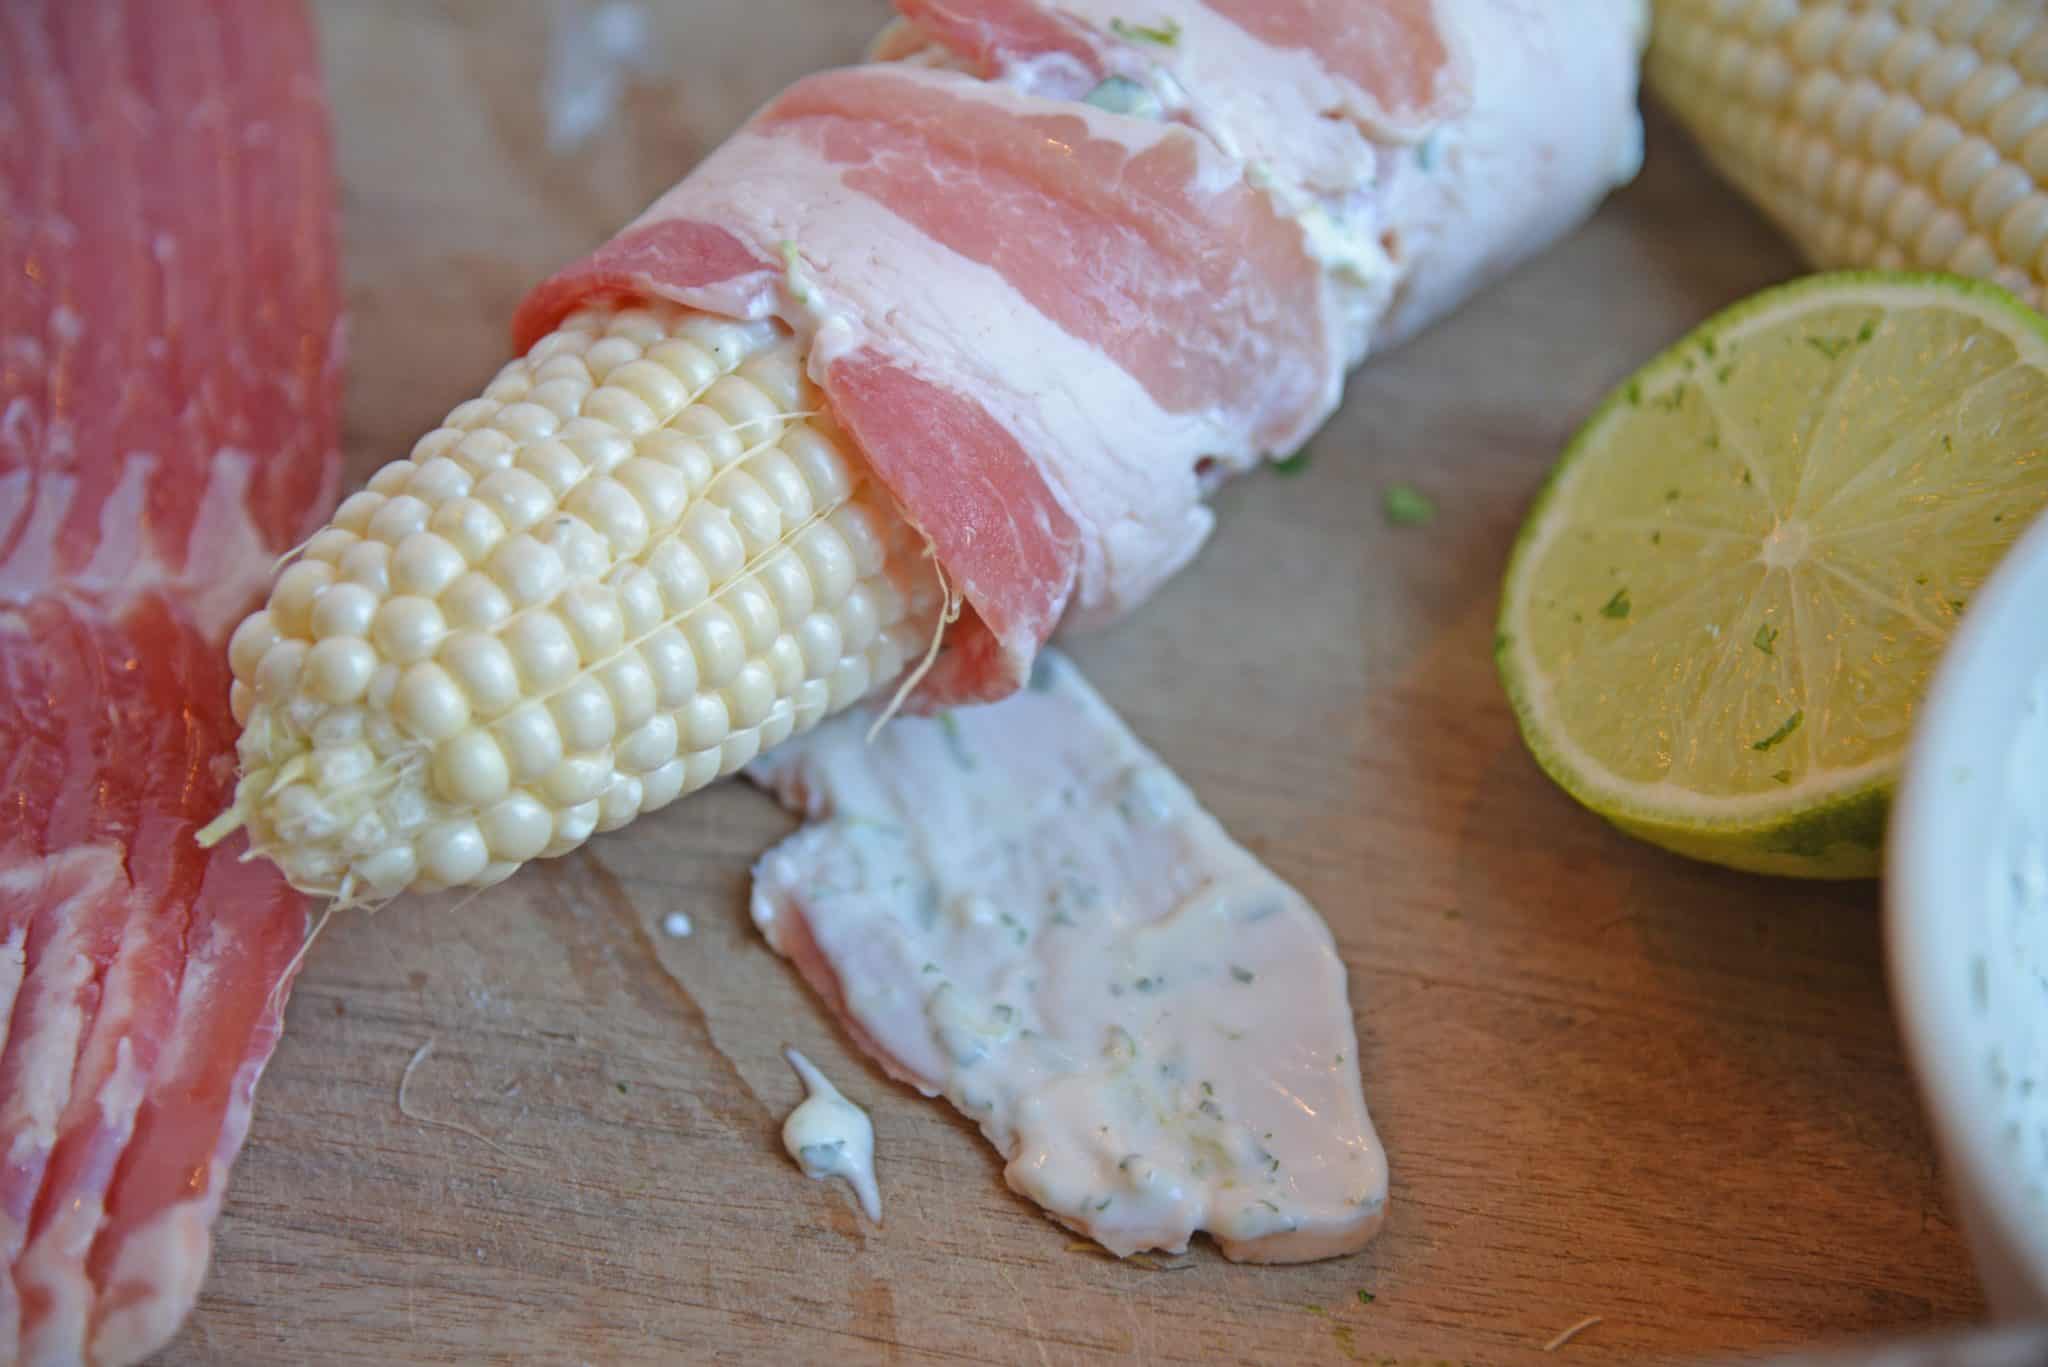 Cilantro Lime Bacon Wrapped Corn is a zesty grilled corn side dish that is perfect for any summer BBQ or Mexican fiesta! A sweet & zesty flavor combination! #grilledcorn #baconwrappedcorn #mexicancorn www.savoryexperiments.com